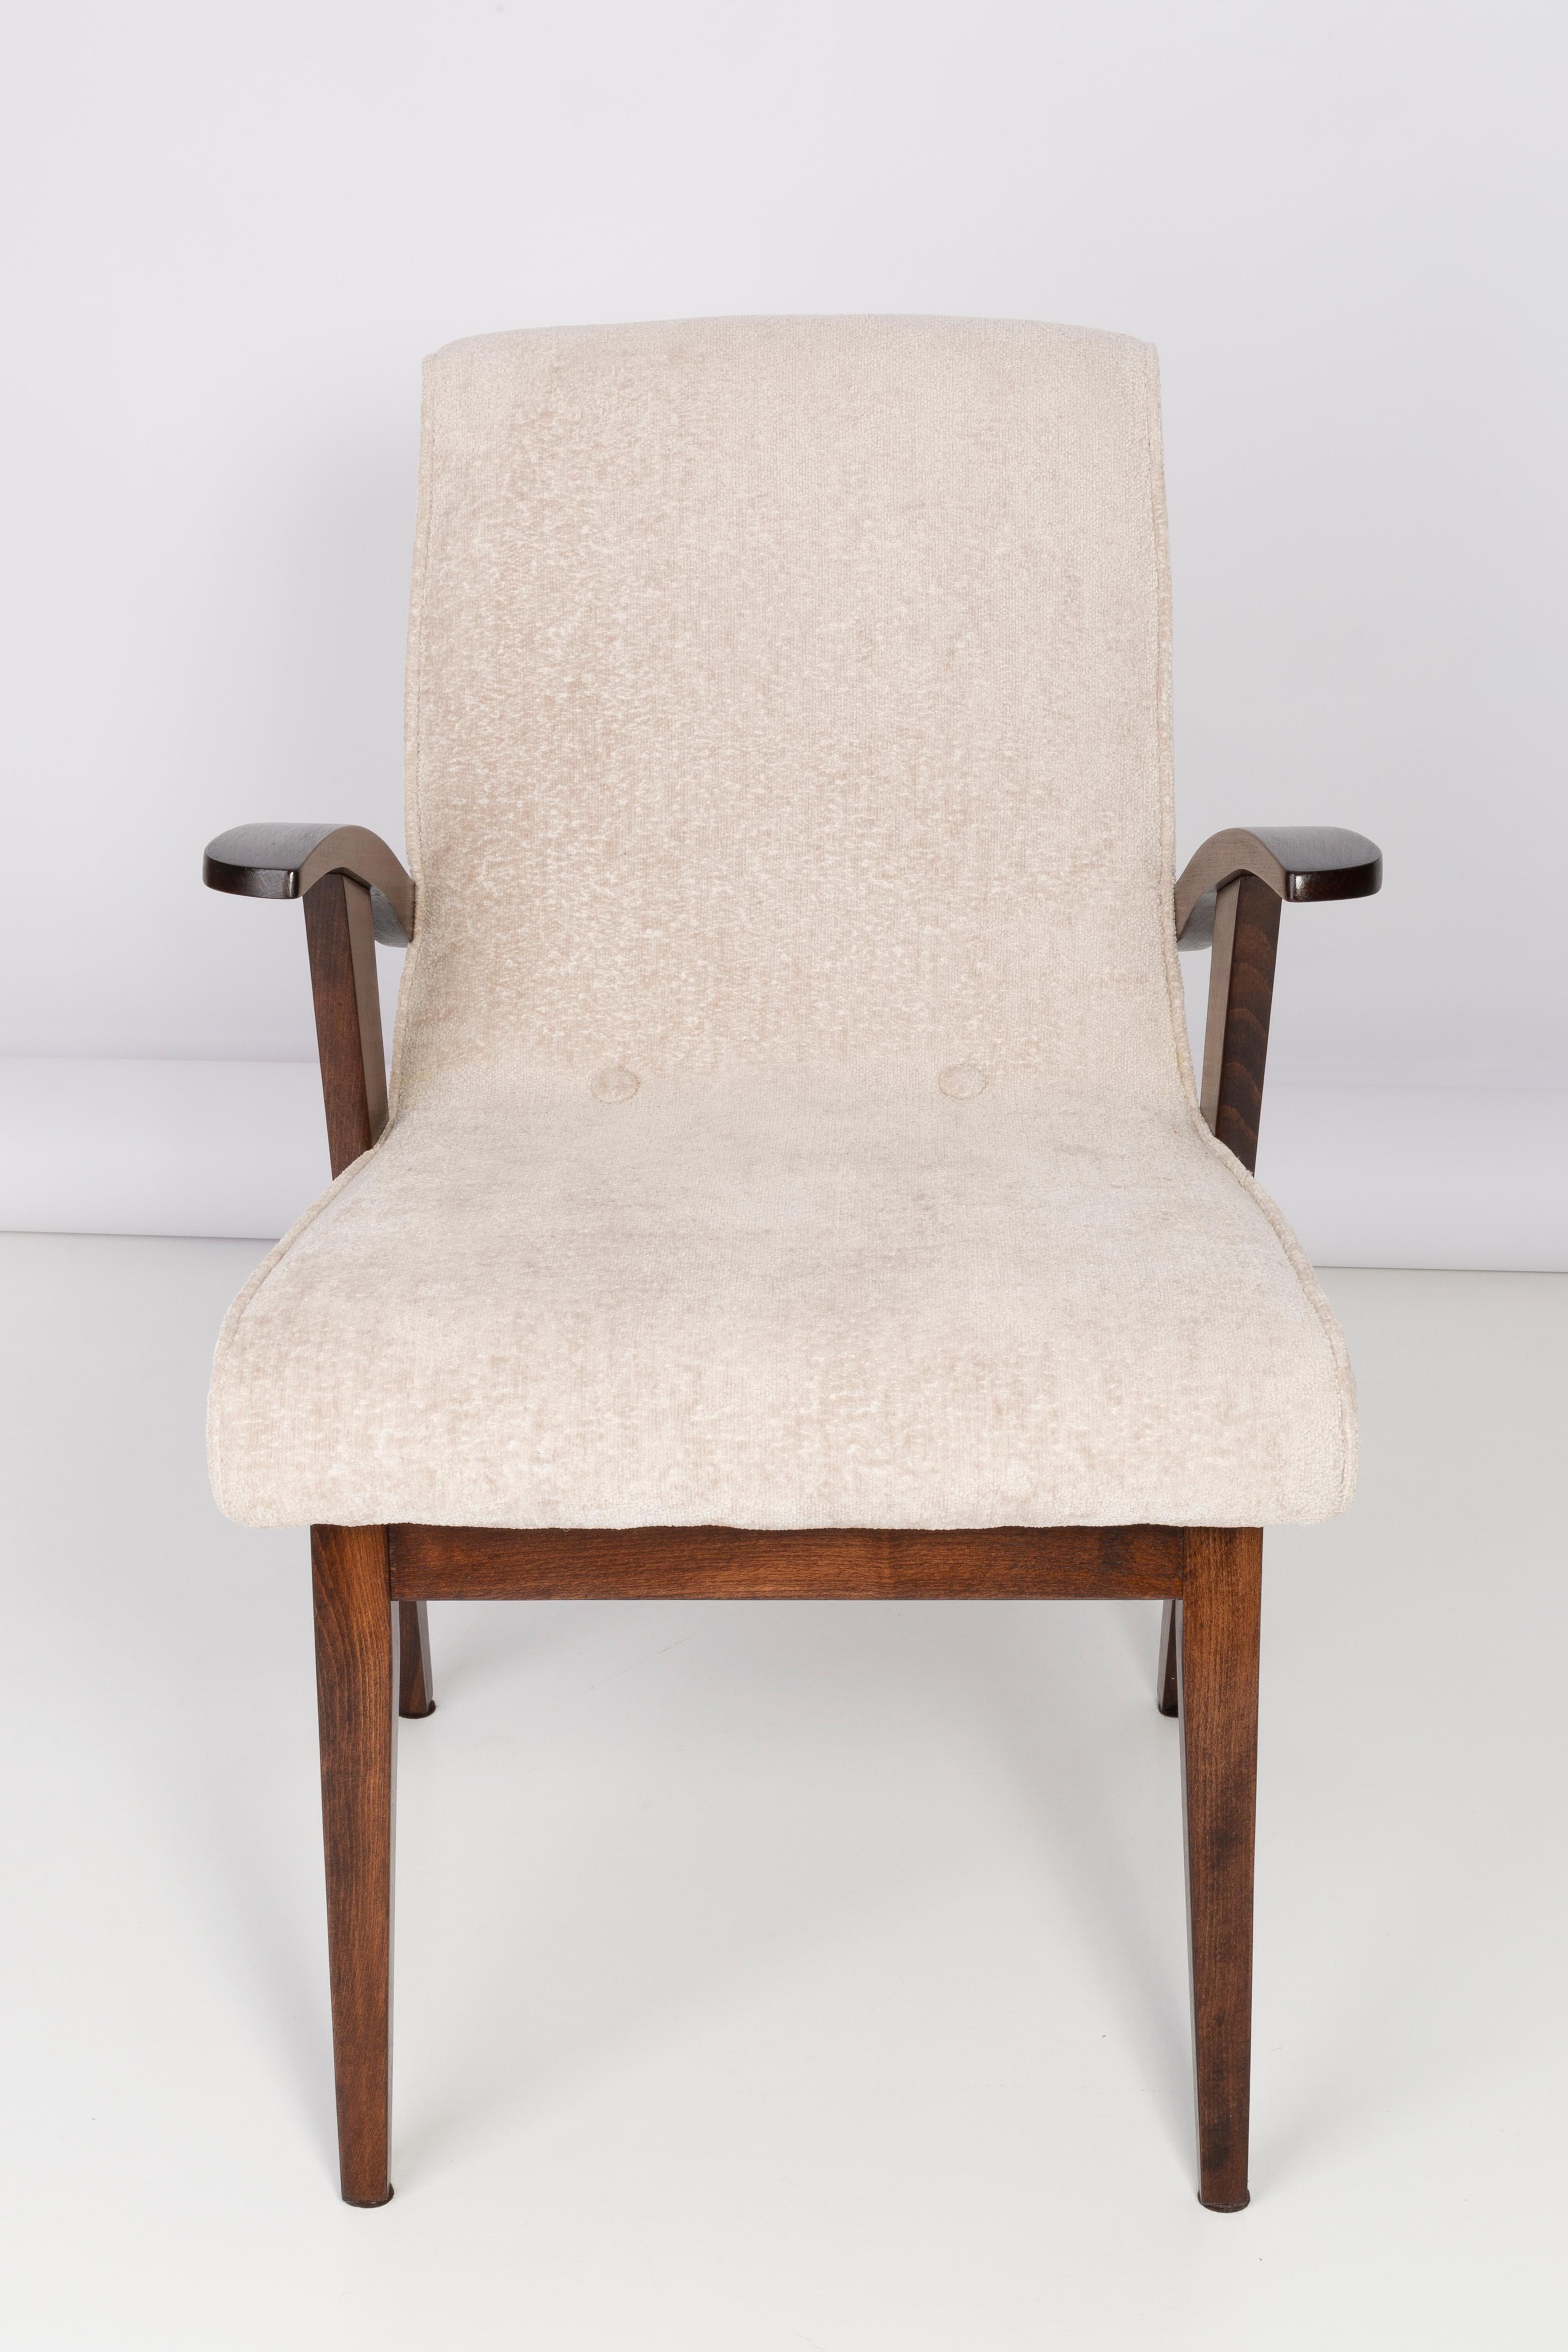 Armchairs designed by Mieczyslaw Puchala in a Classic edition. Medium brown wood combined with a light cream bouclé fabric gives it elegance and nobility. The chairs have undergone a full carpentry and upholstery renovation. The wood is in excellent